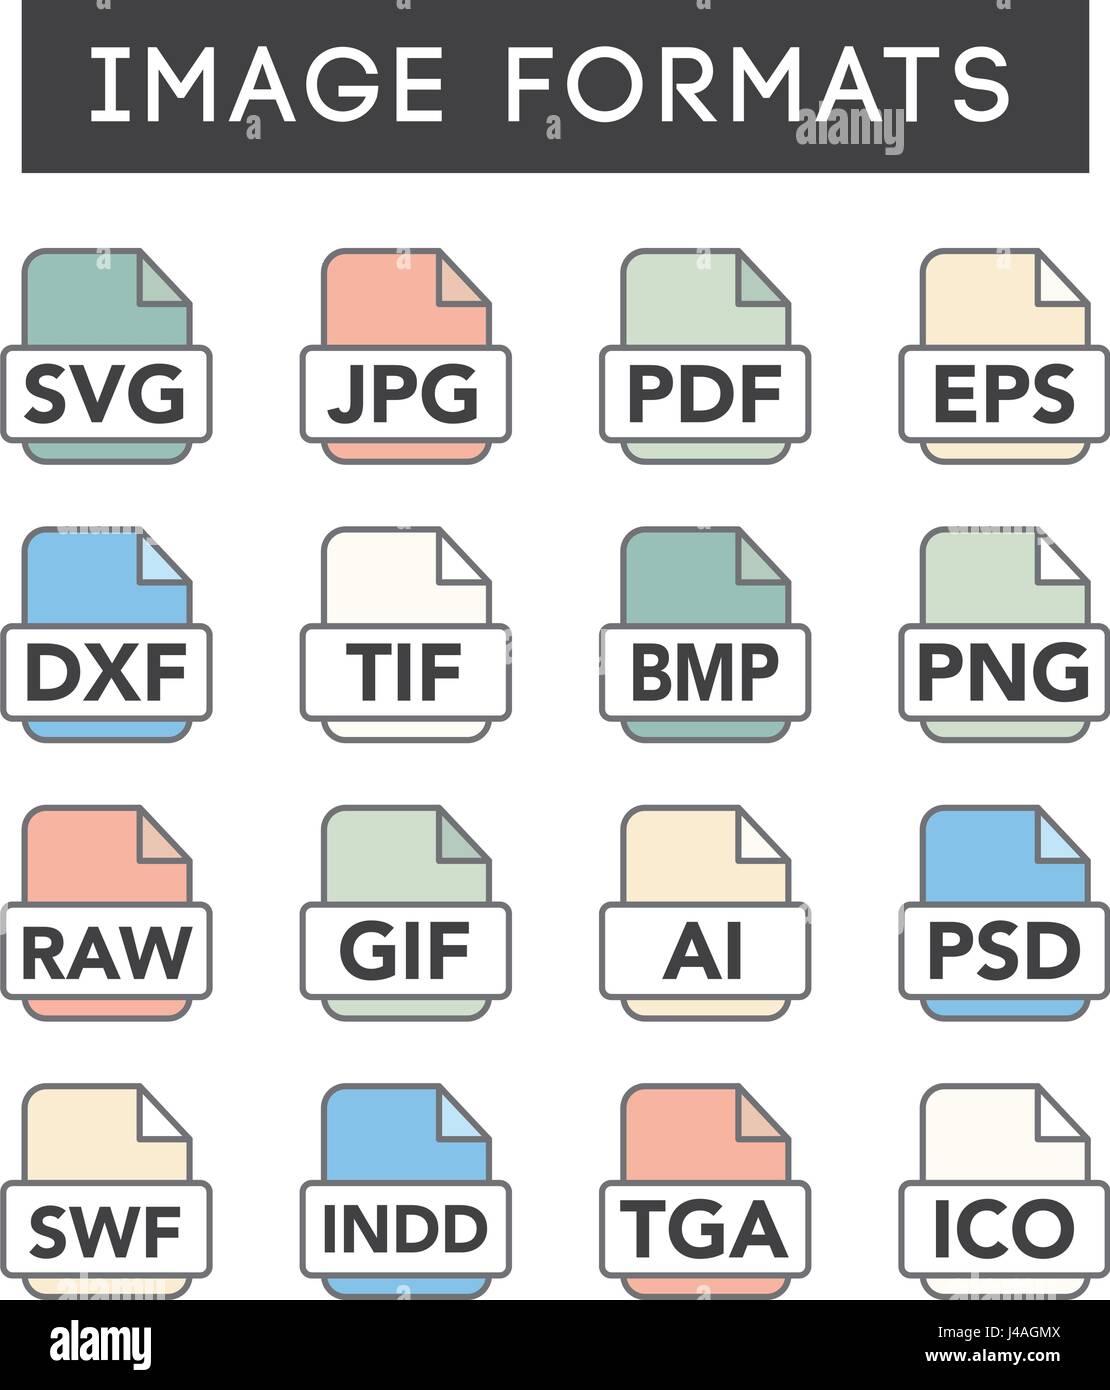 Icons to show different image formats, including JPG, SVG, EPS, DXF, etc Stock Vector